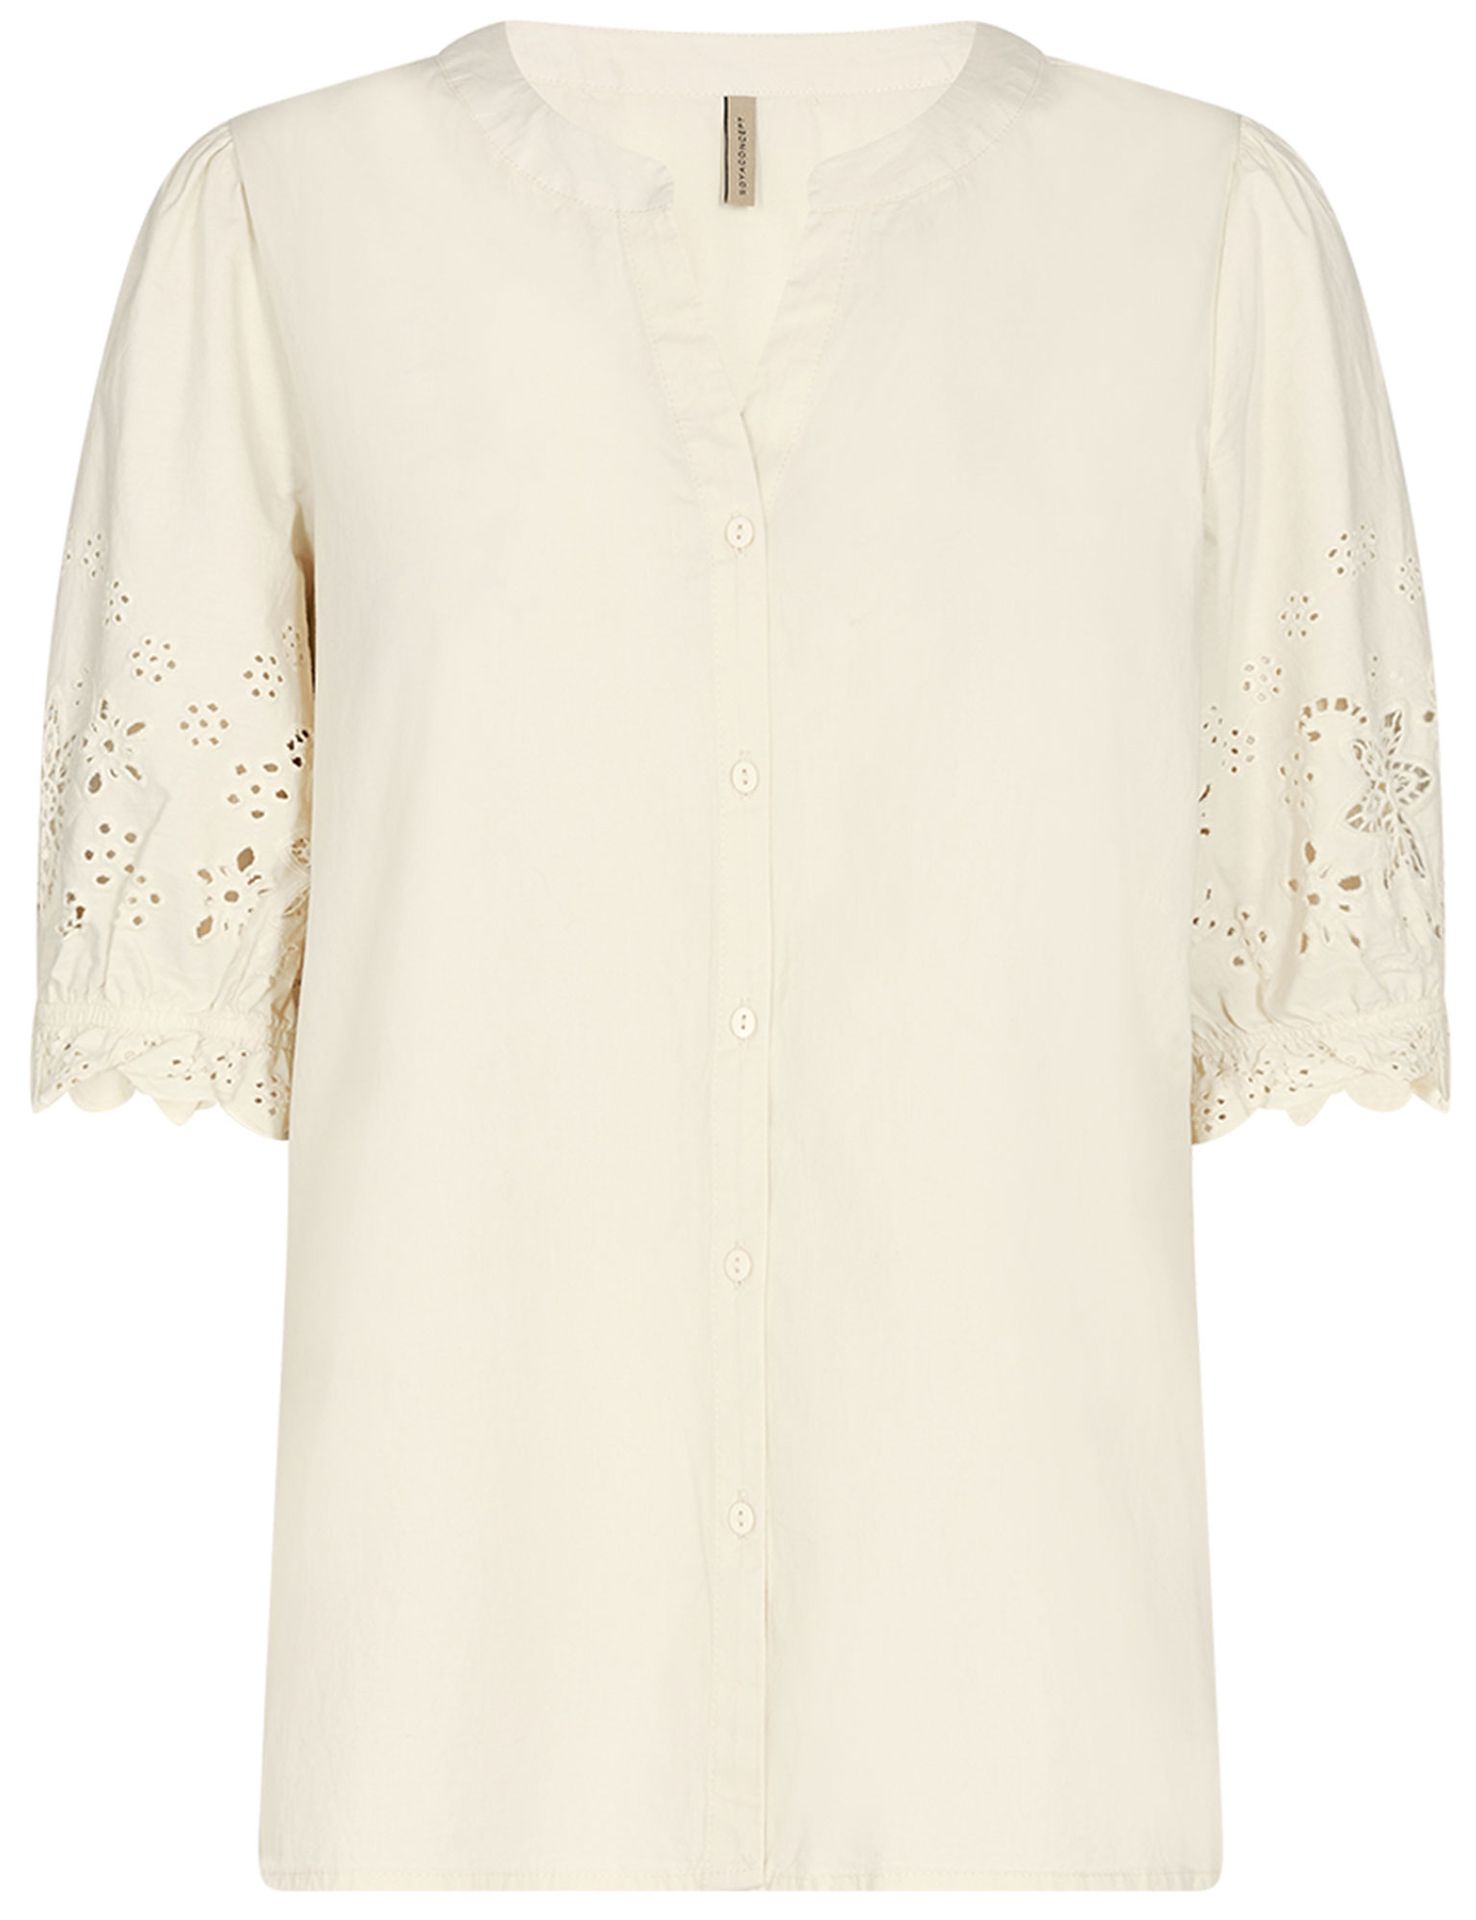 Soya Soyaconcept blouse Milly Off white 00073661-5000